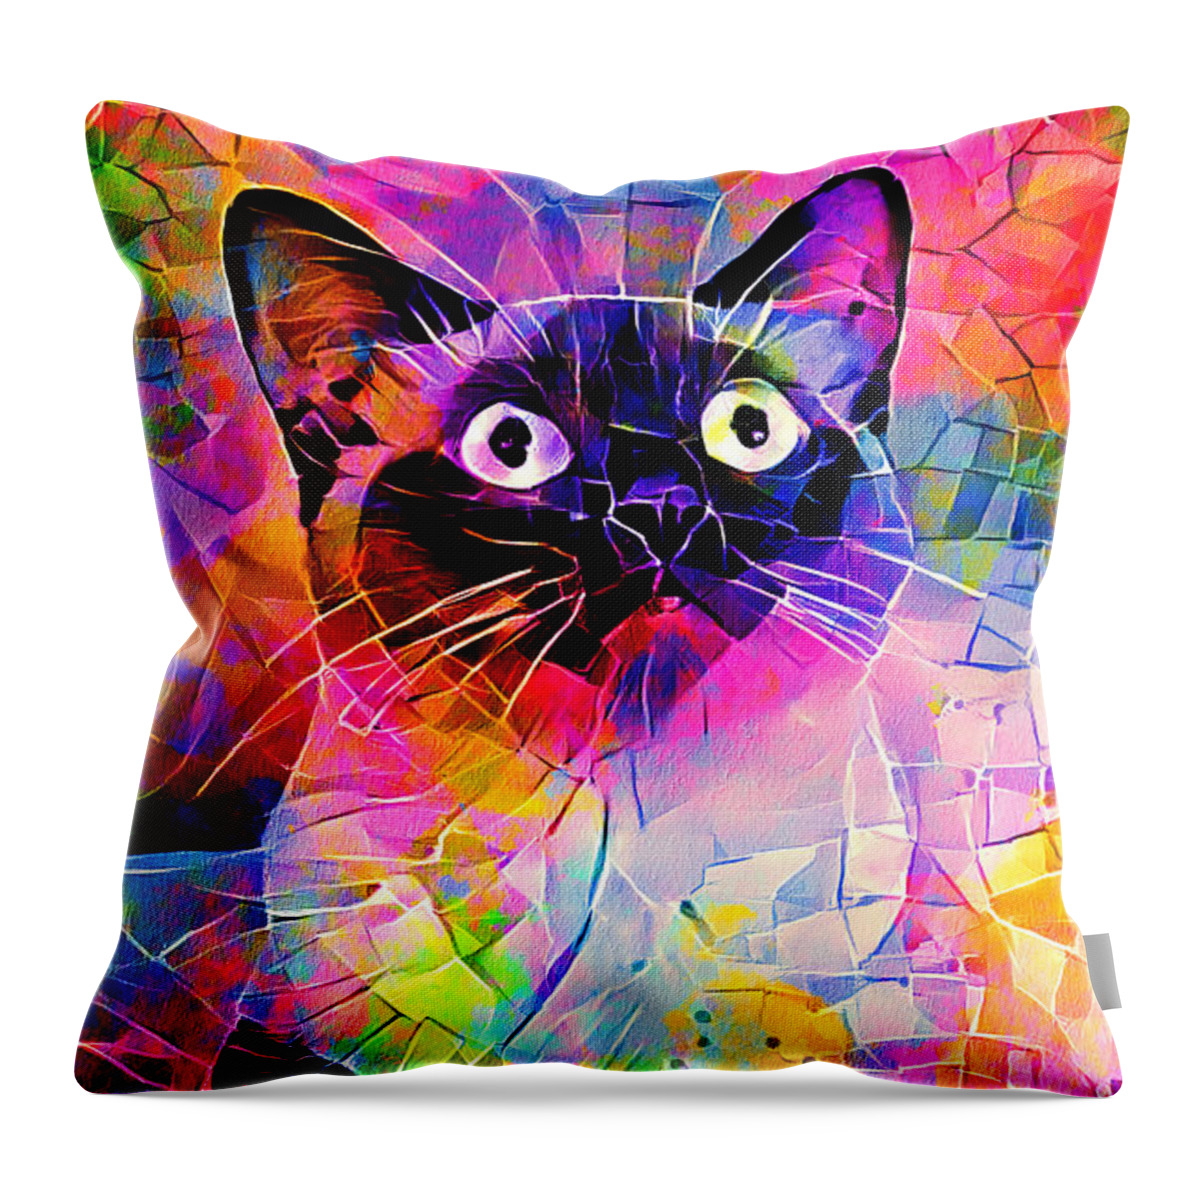 Alerted Cat Throw Pillow featuring the digital art Siamese cat with a worried expression - colorful irregular tiles mosaic effect by Nicko Prints